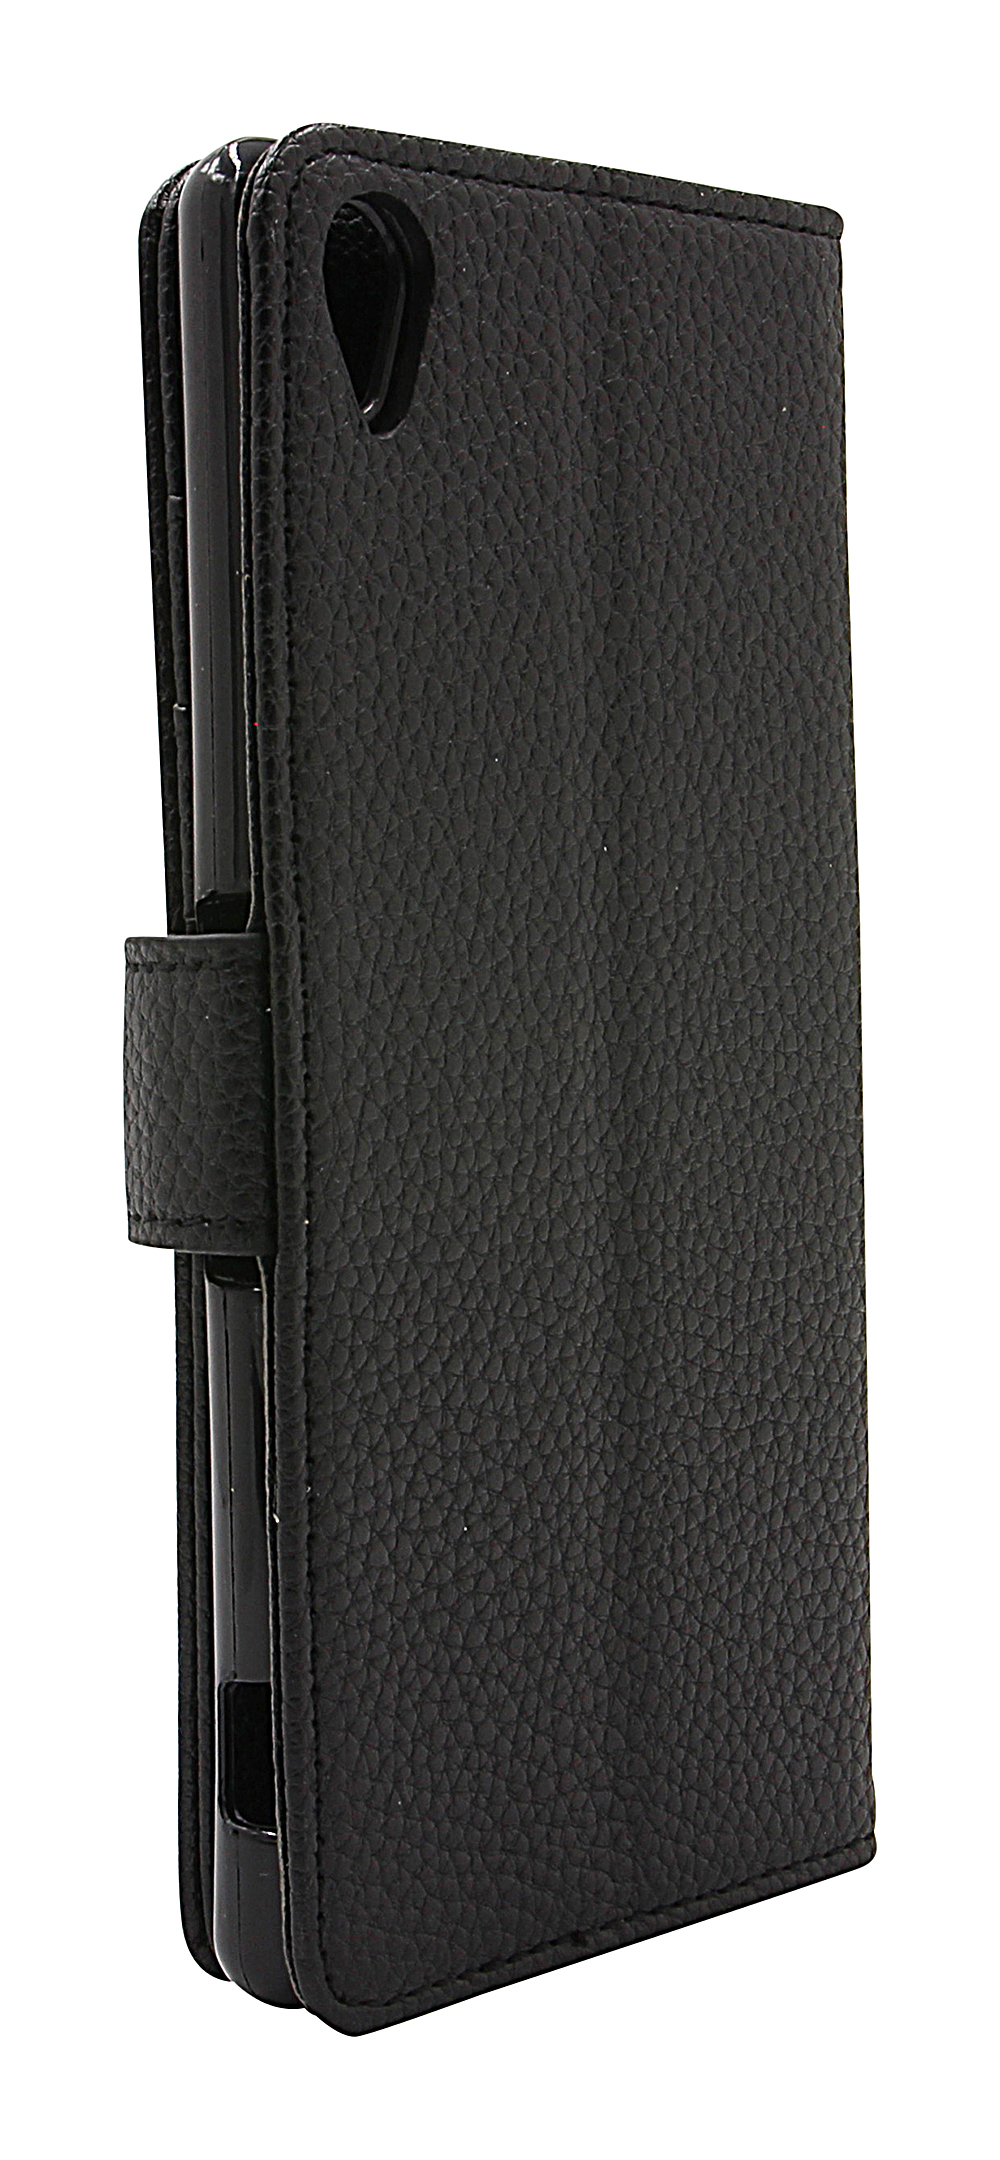 New Standcase Wallet Sony Xperia Z3 (D6603)